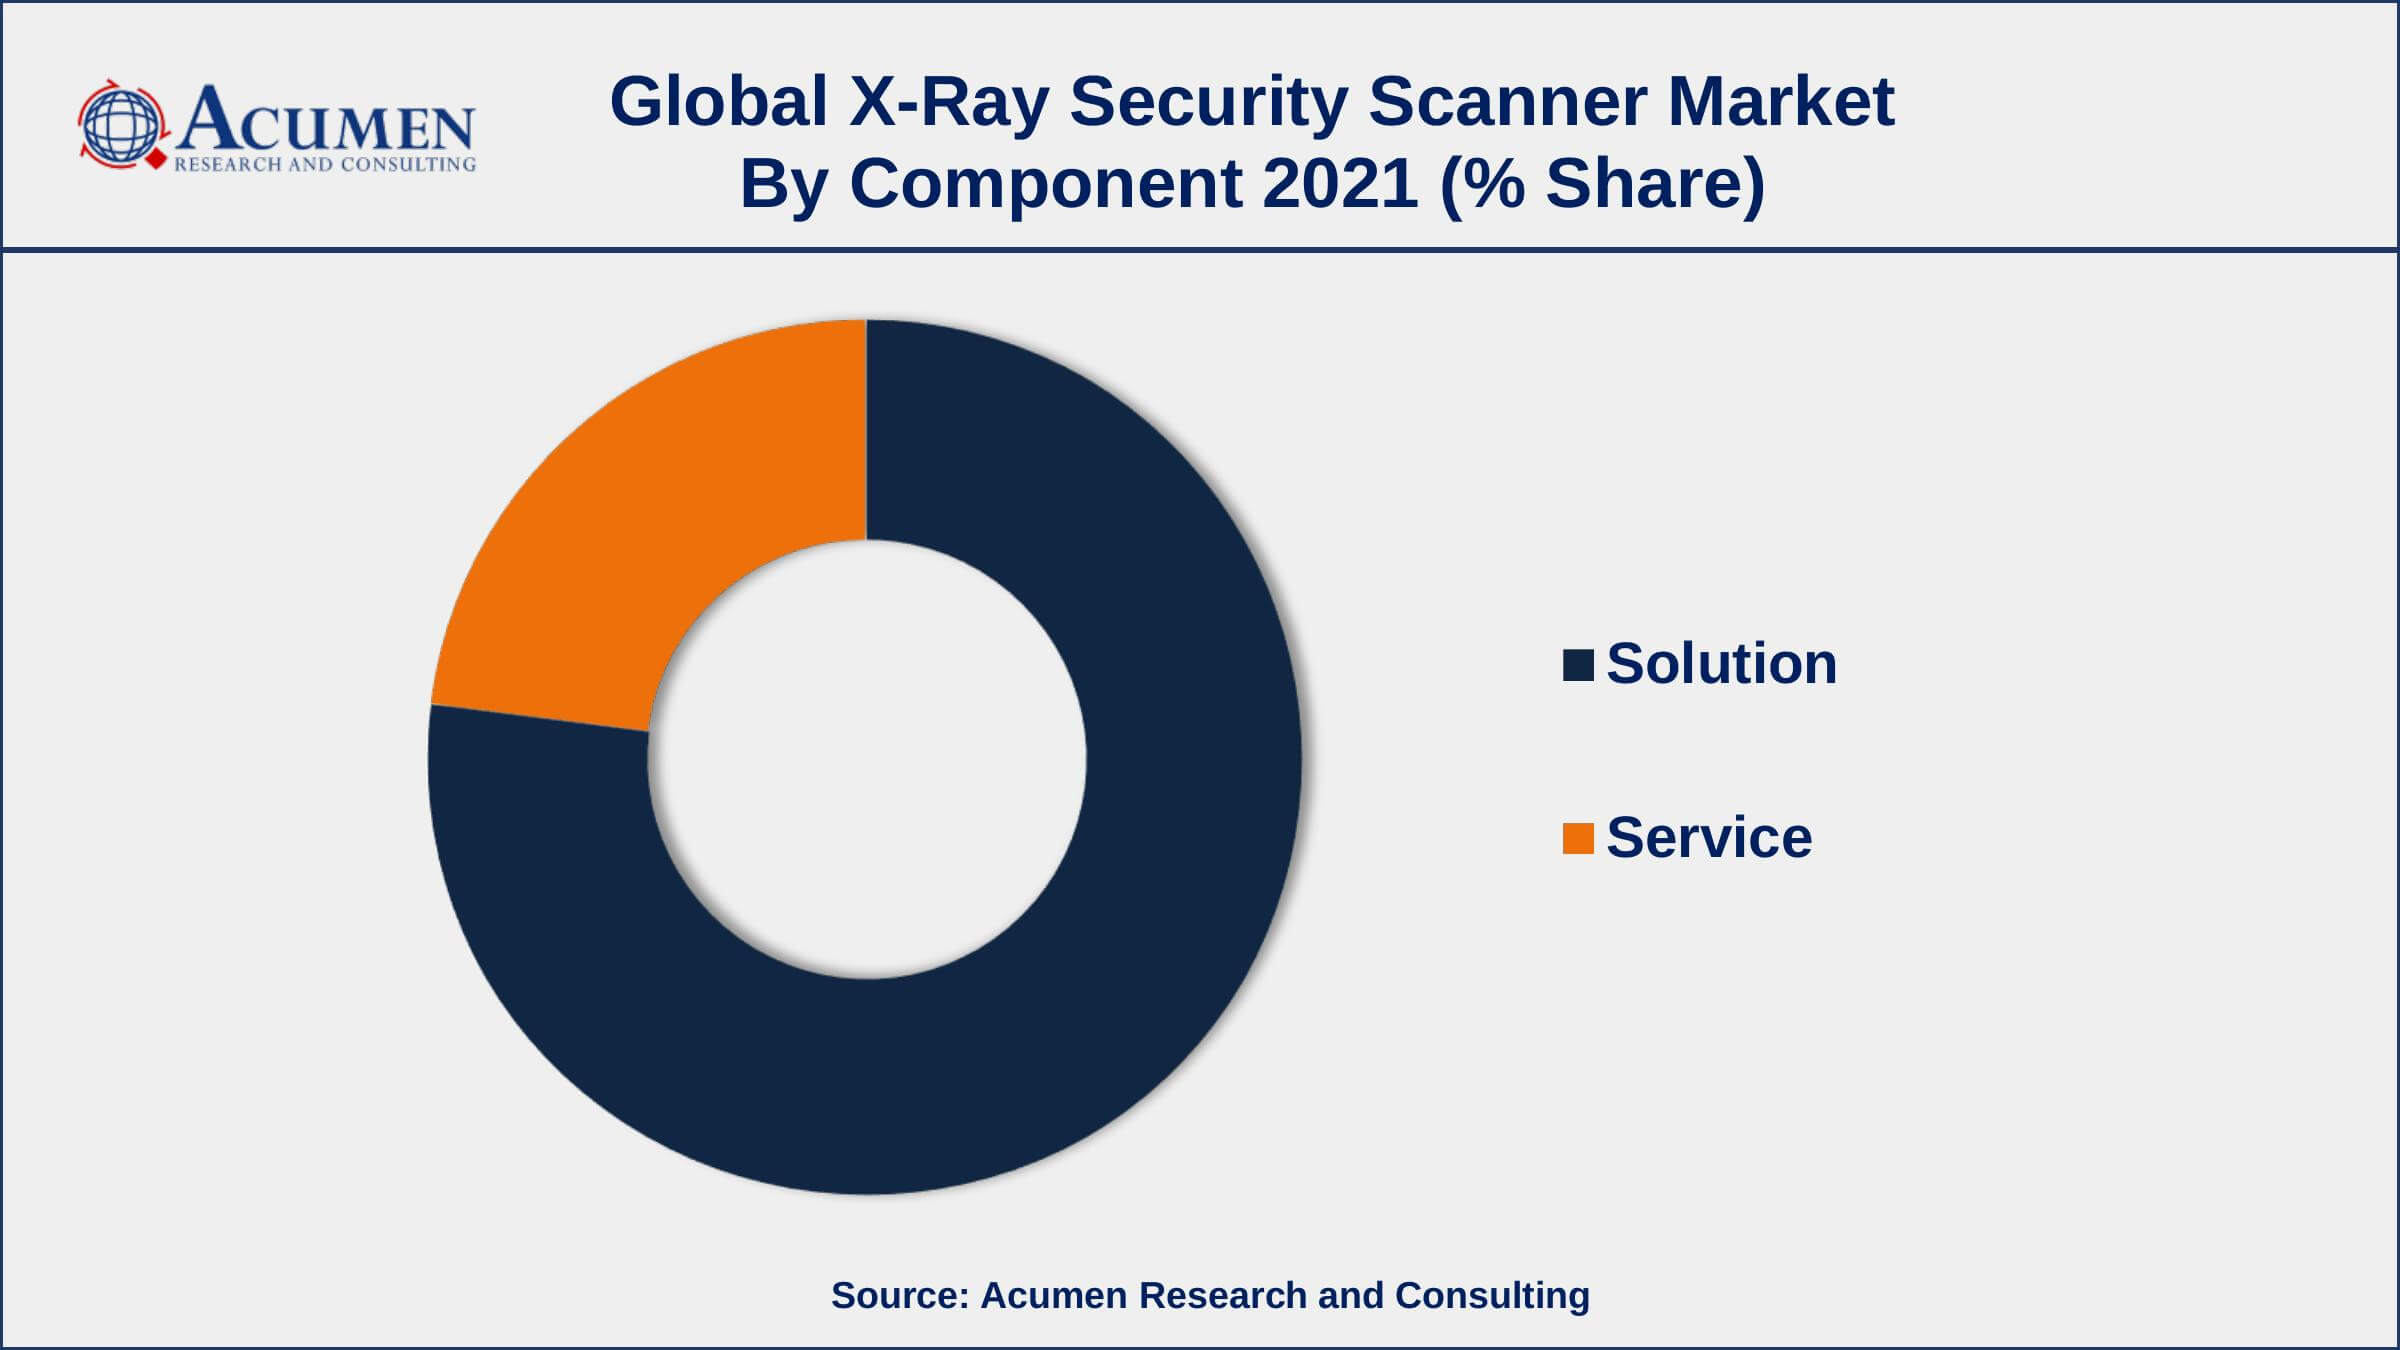 By component, the solution segment has accounted market share of over 77% in 2021